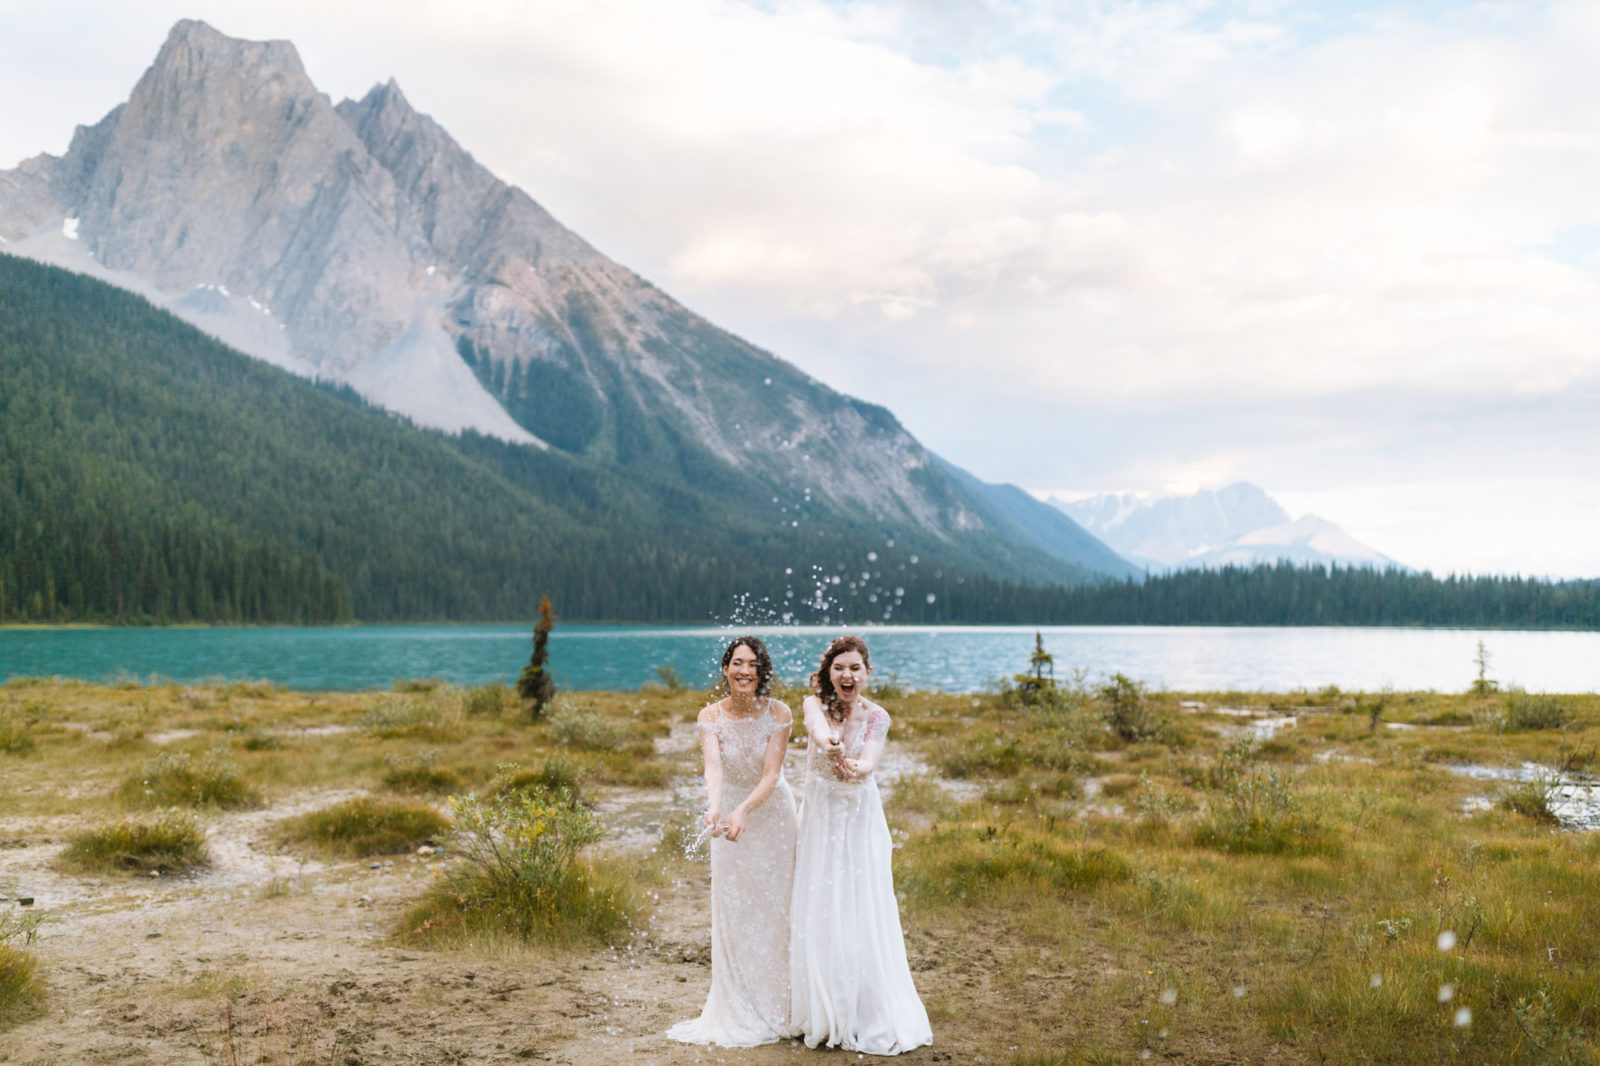 Newly wed couple pops champagne on the shores of Emerald Lake with the mountains of Yoho National Park in the background